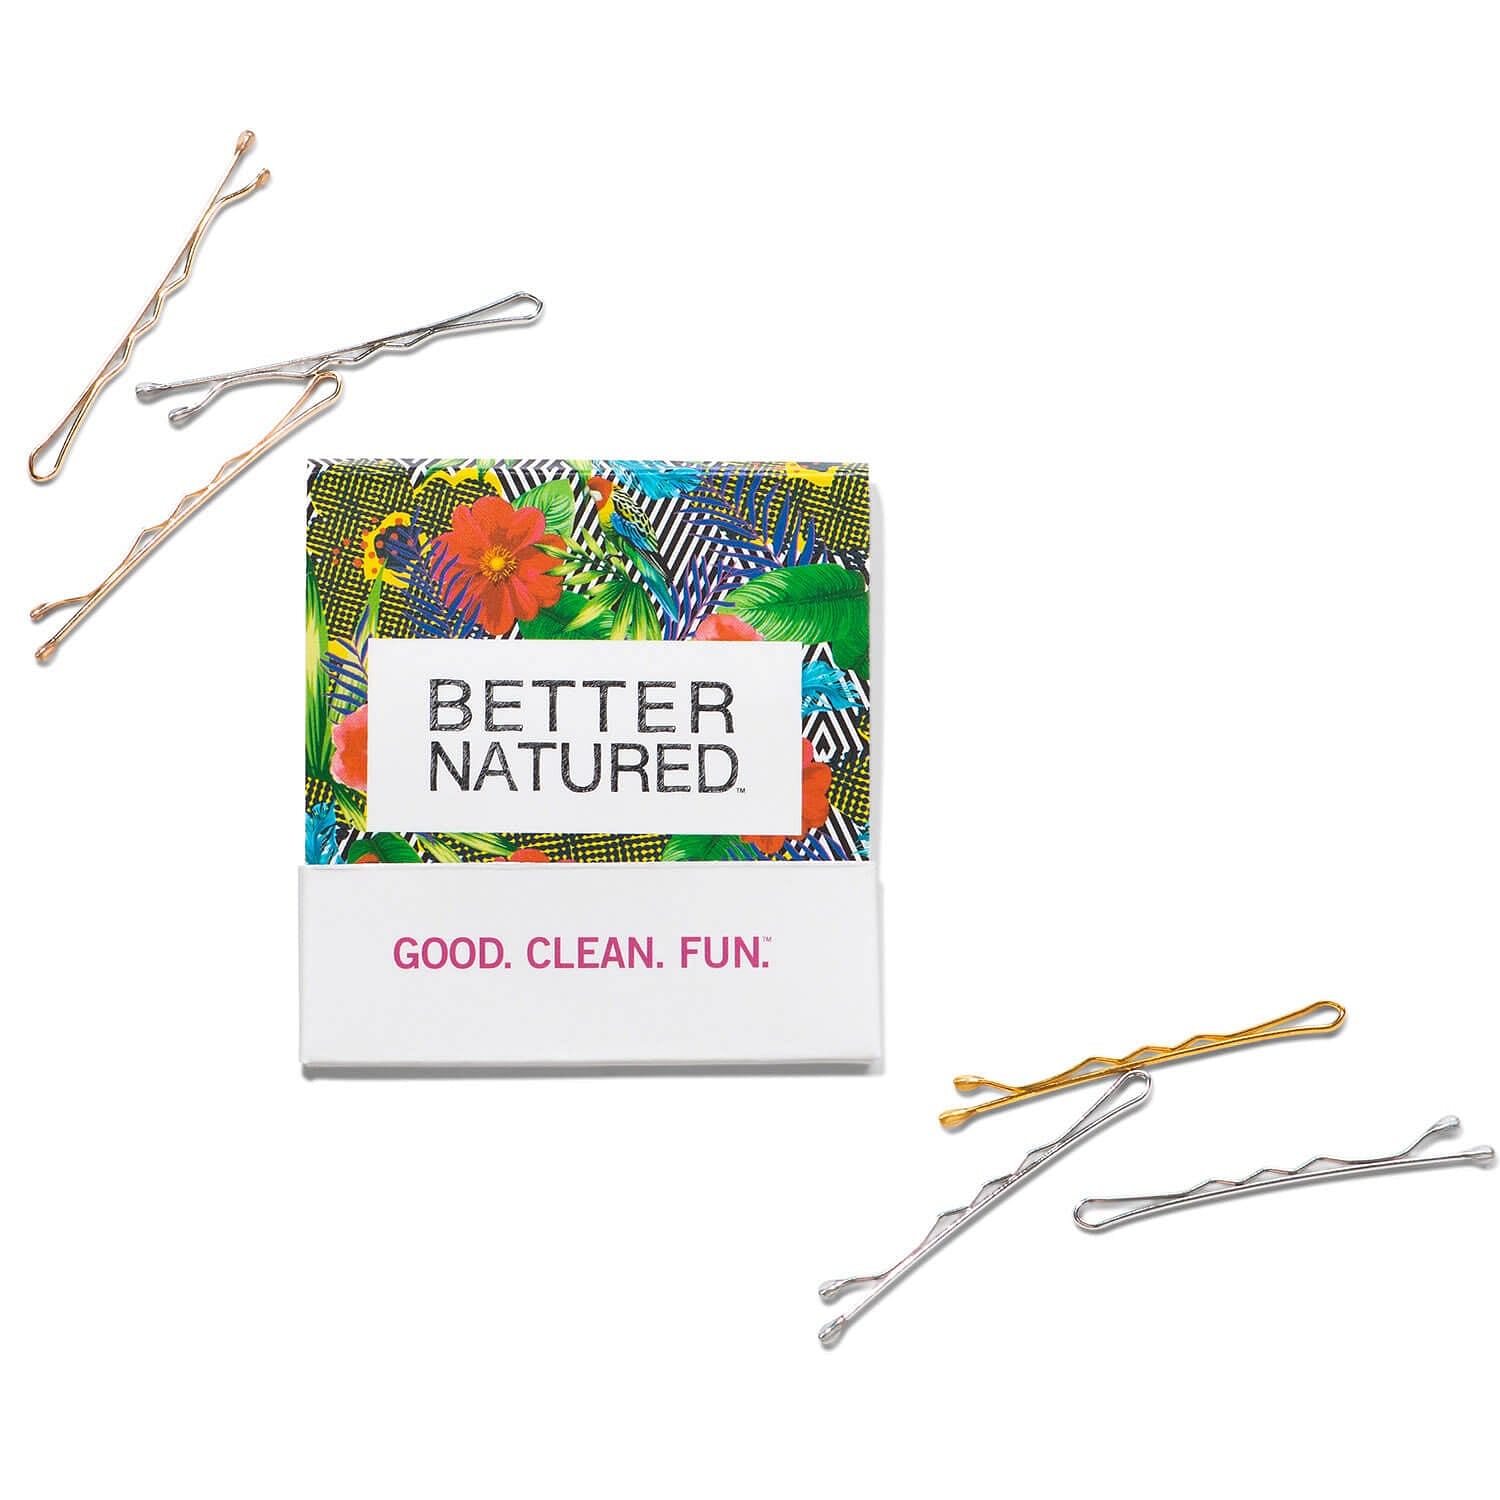 Bobby Pin Matchbook With Cute Bobby Pins - Better Natured